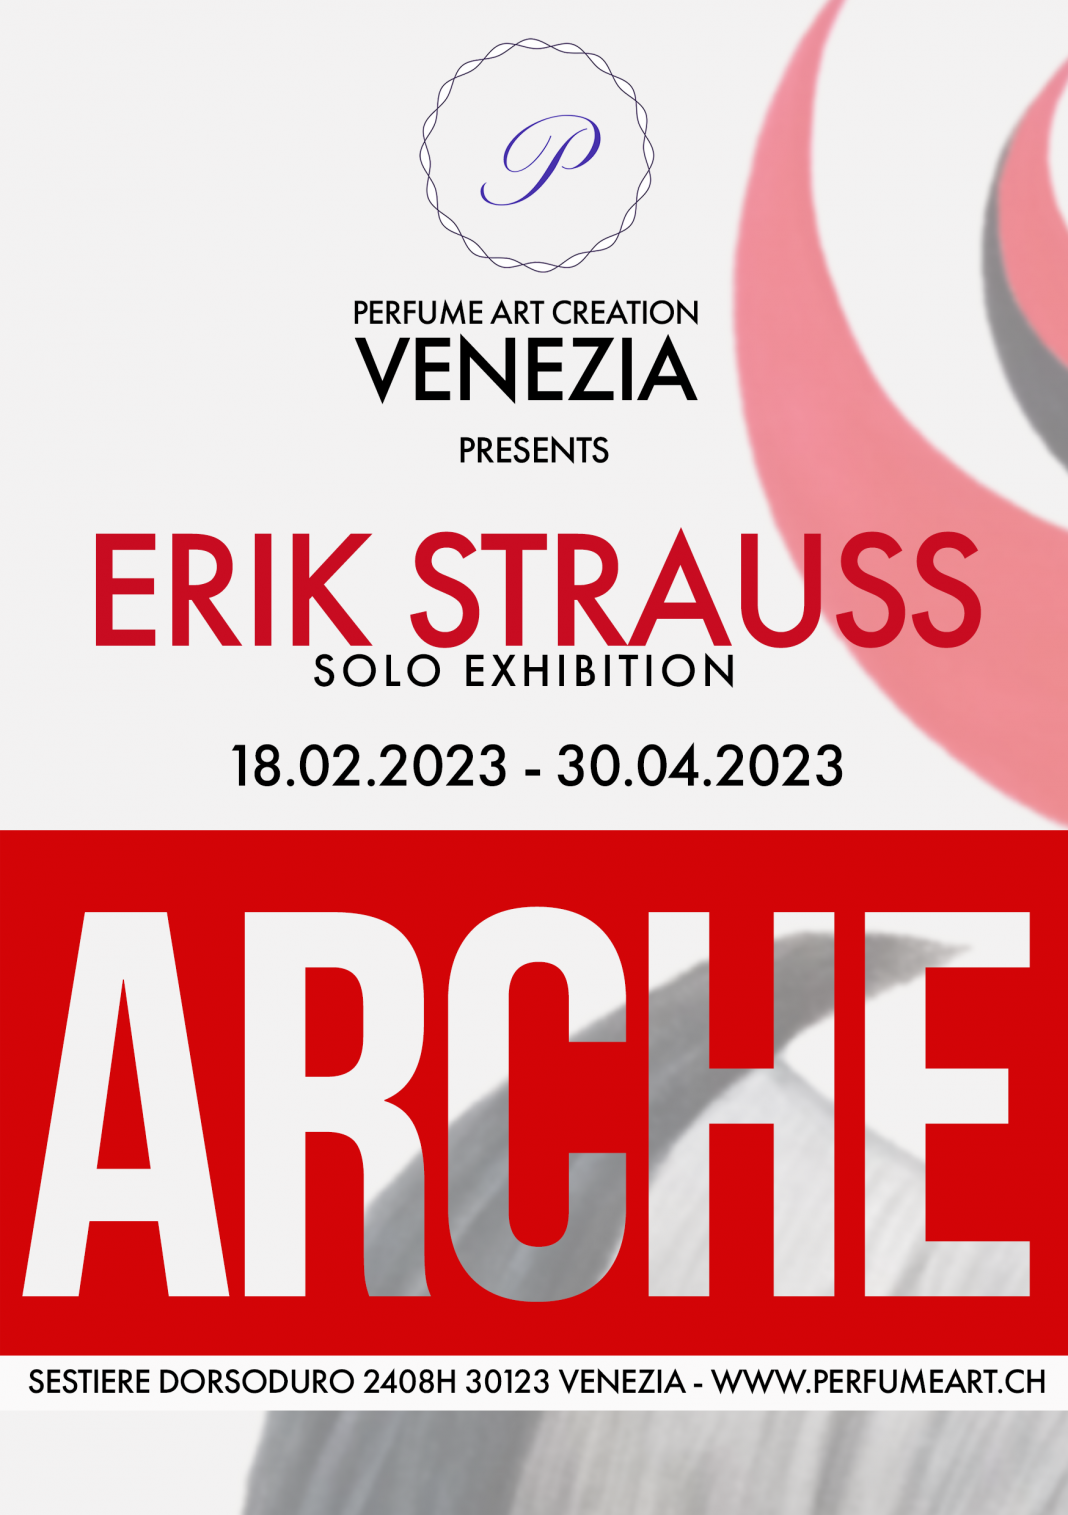 Erik Strauss – ARCHEhttps://www.exibart.com/repository/media/formidable/11/img/6ad/Invitation-A5-Recto-1068x1515.png